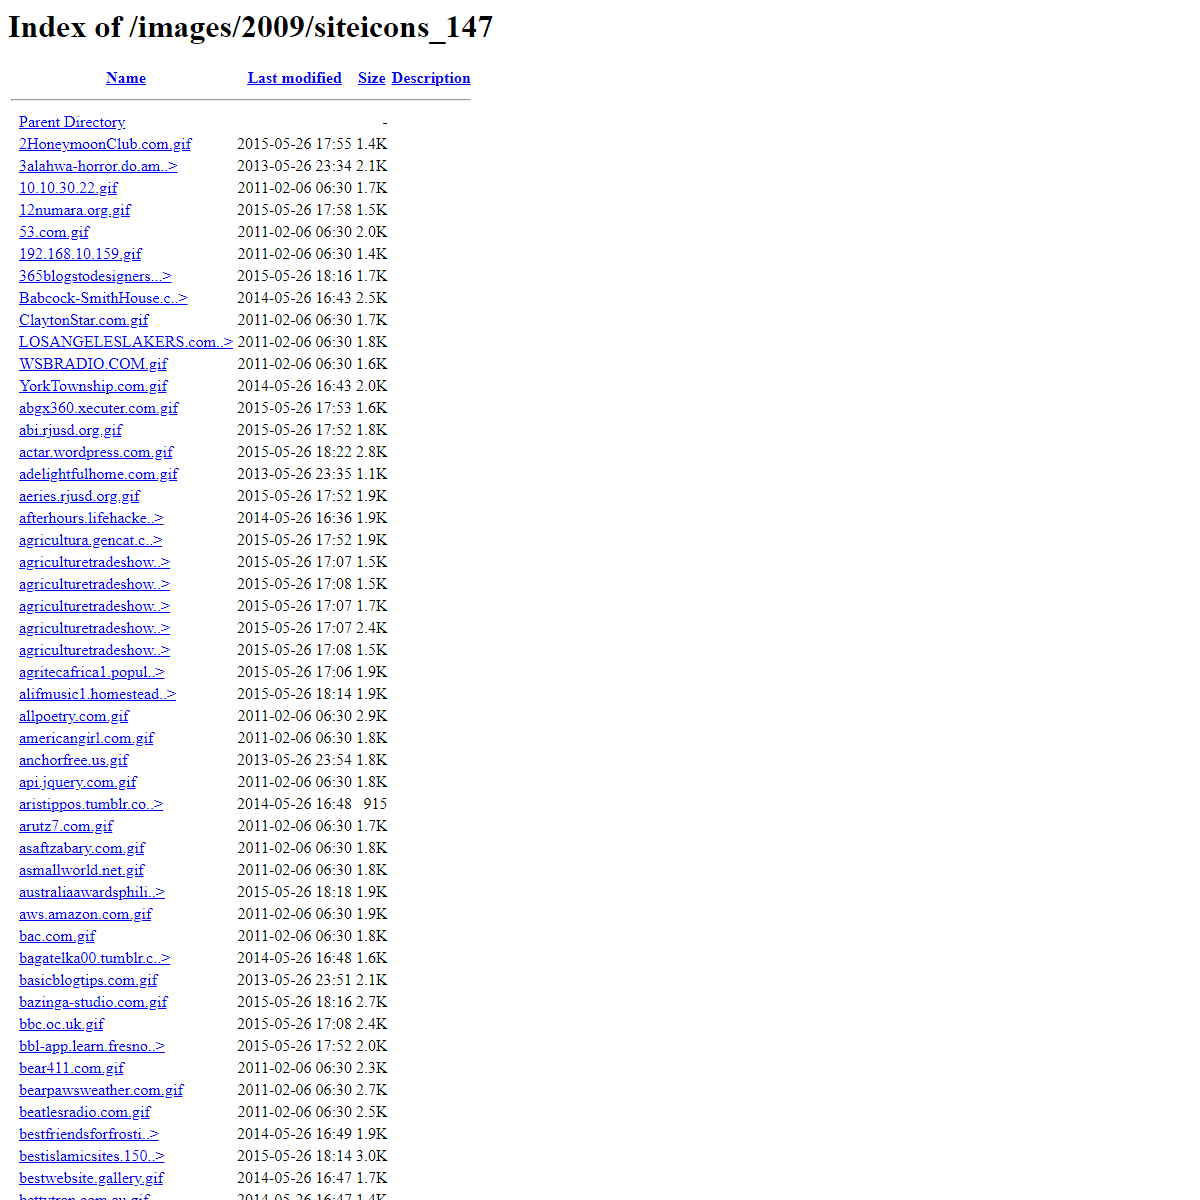 A complete backup of https://www.allmyfaves.com/images/2009/siteicons_147/